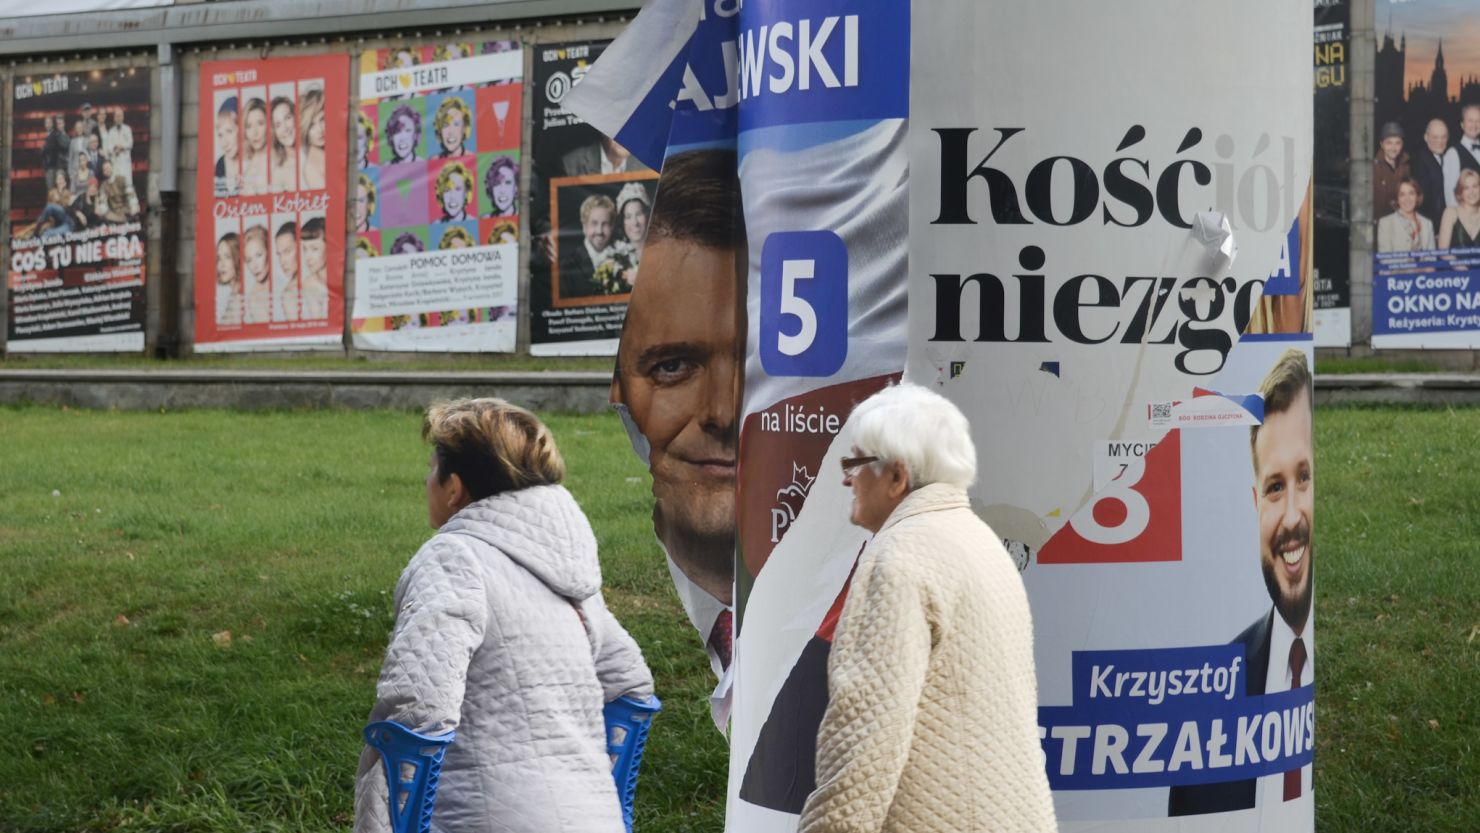 A defaced poster for a PiS candidate billows in the wind in Warsaw. Poland's election campaign has been toxic, with polls indicating a tight result.